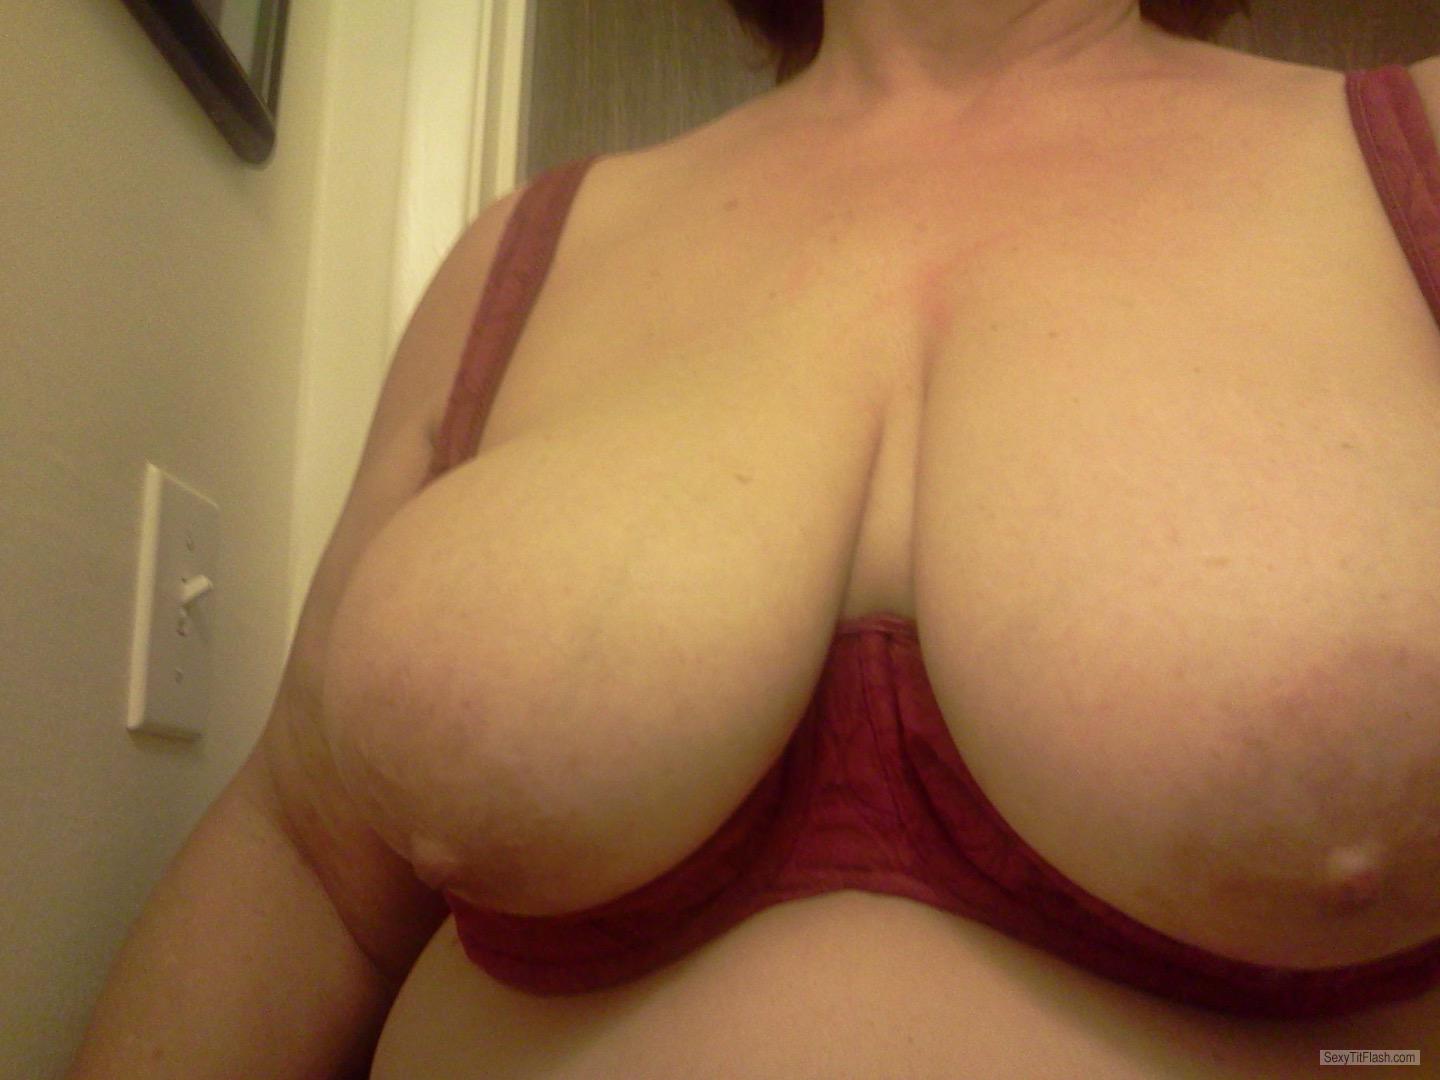 Tit Flash: My Very Big Tits - Hot Wife from United States